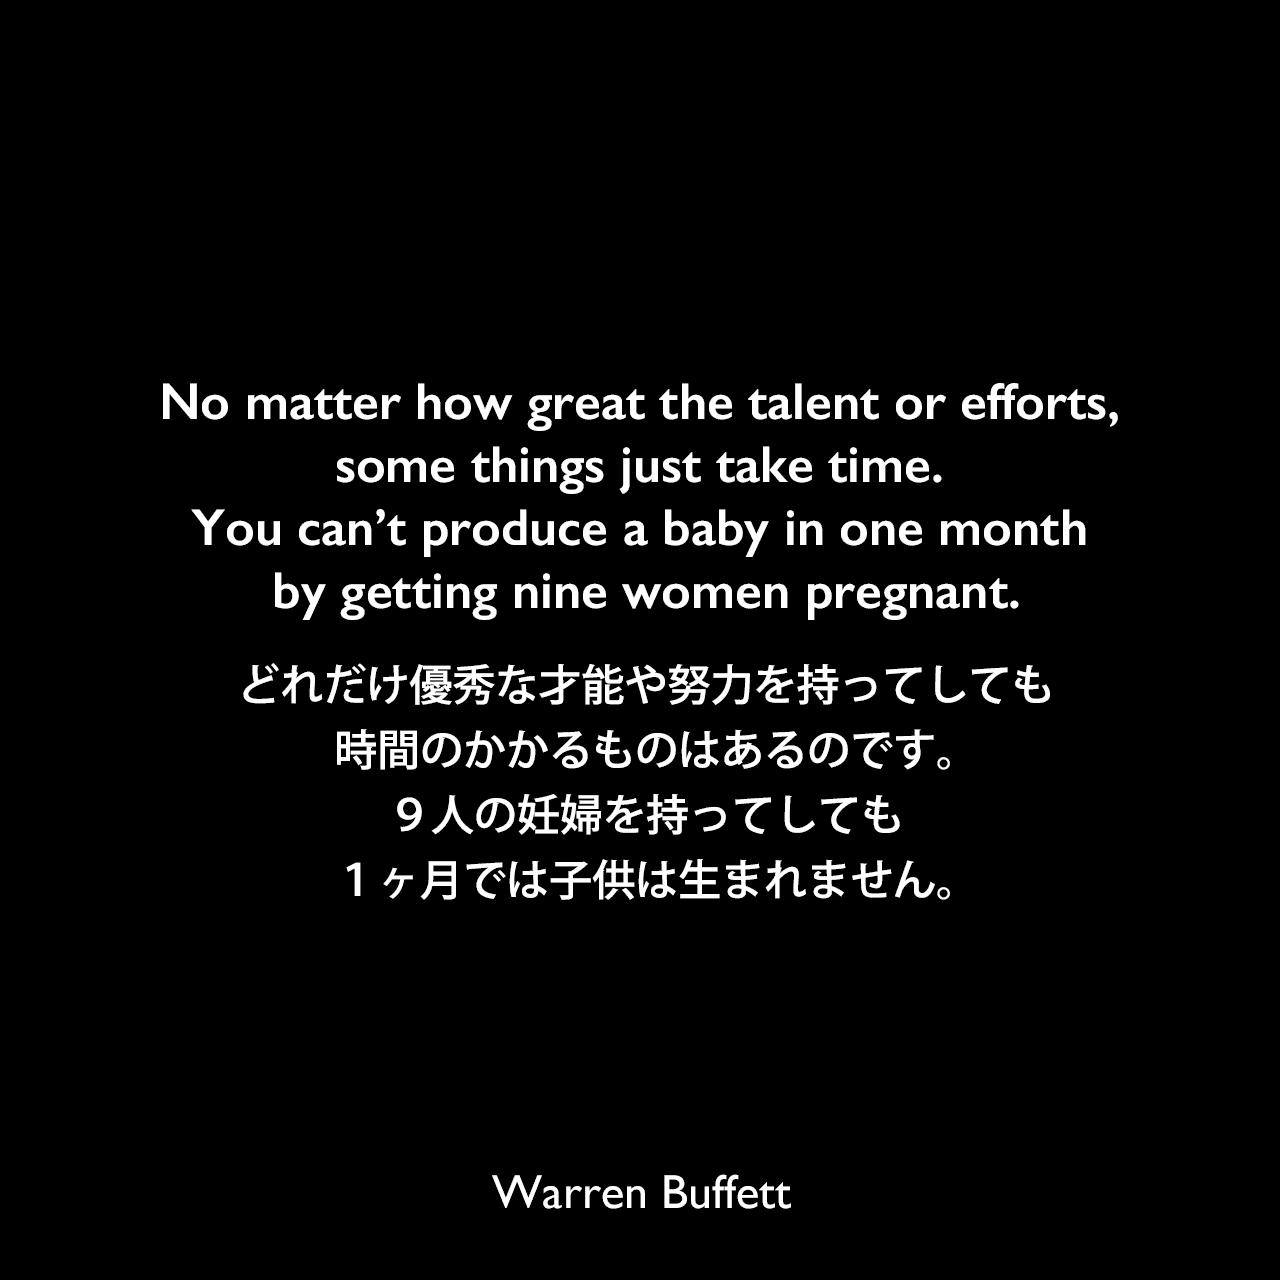 No matter how great the talent or efforts, some things just take time. You can’t produce a baby in one month by getting nine women pregnant.どれだけ優秀な才能や努力を持ってしても、時間のかかるものはあるのです。９人の妊婦を持ってしても、１ヶ月では子供は生まれません。Warren Buffett